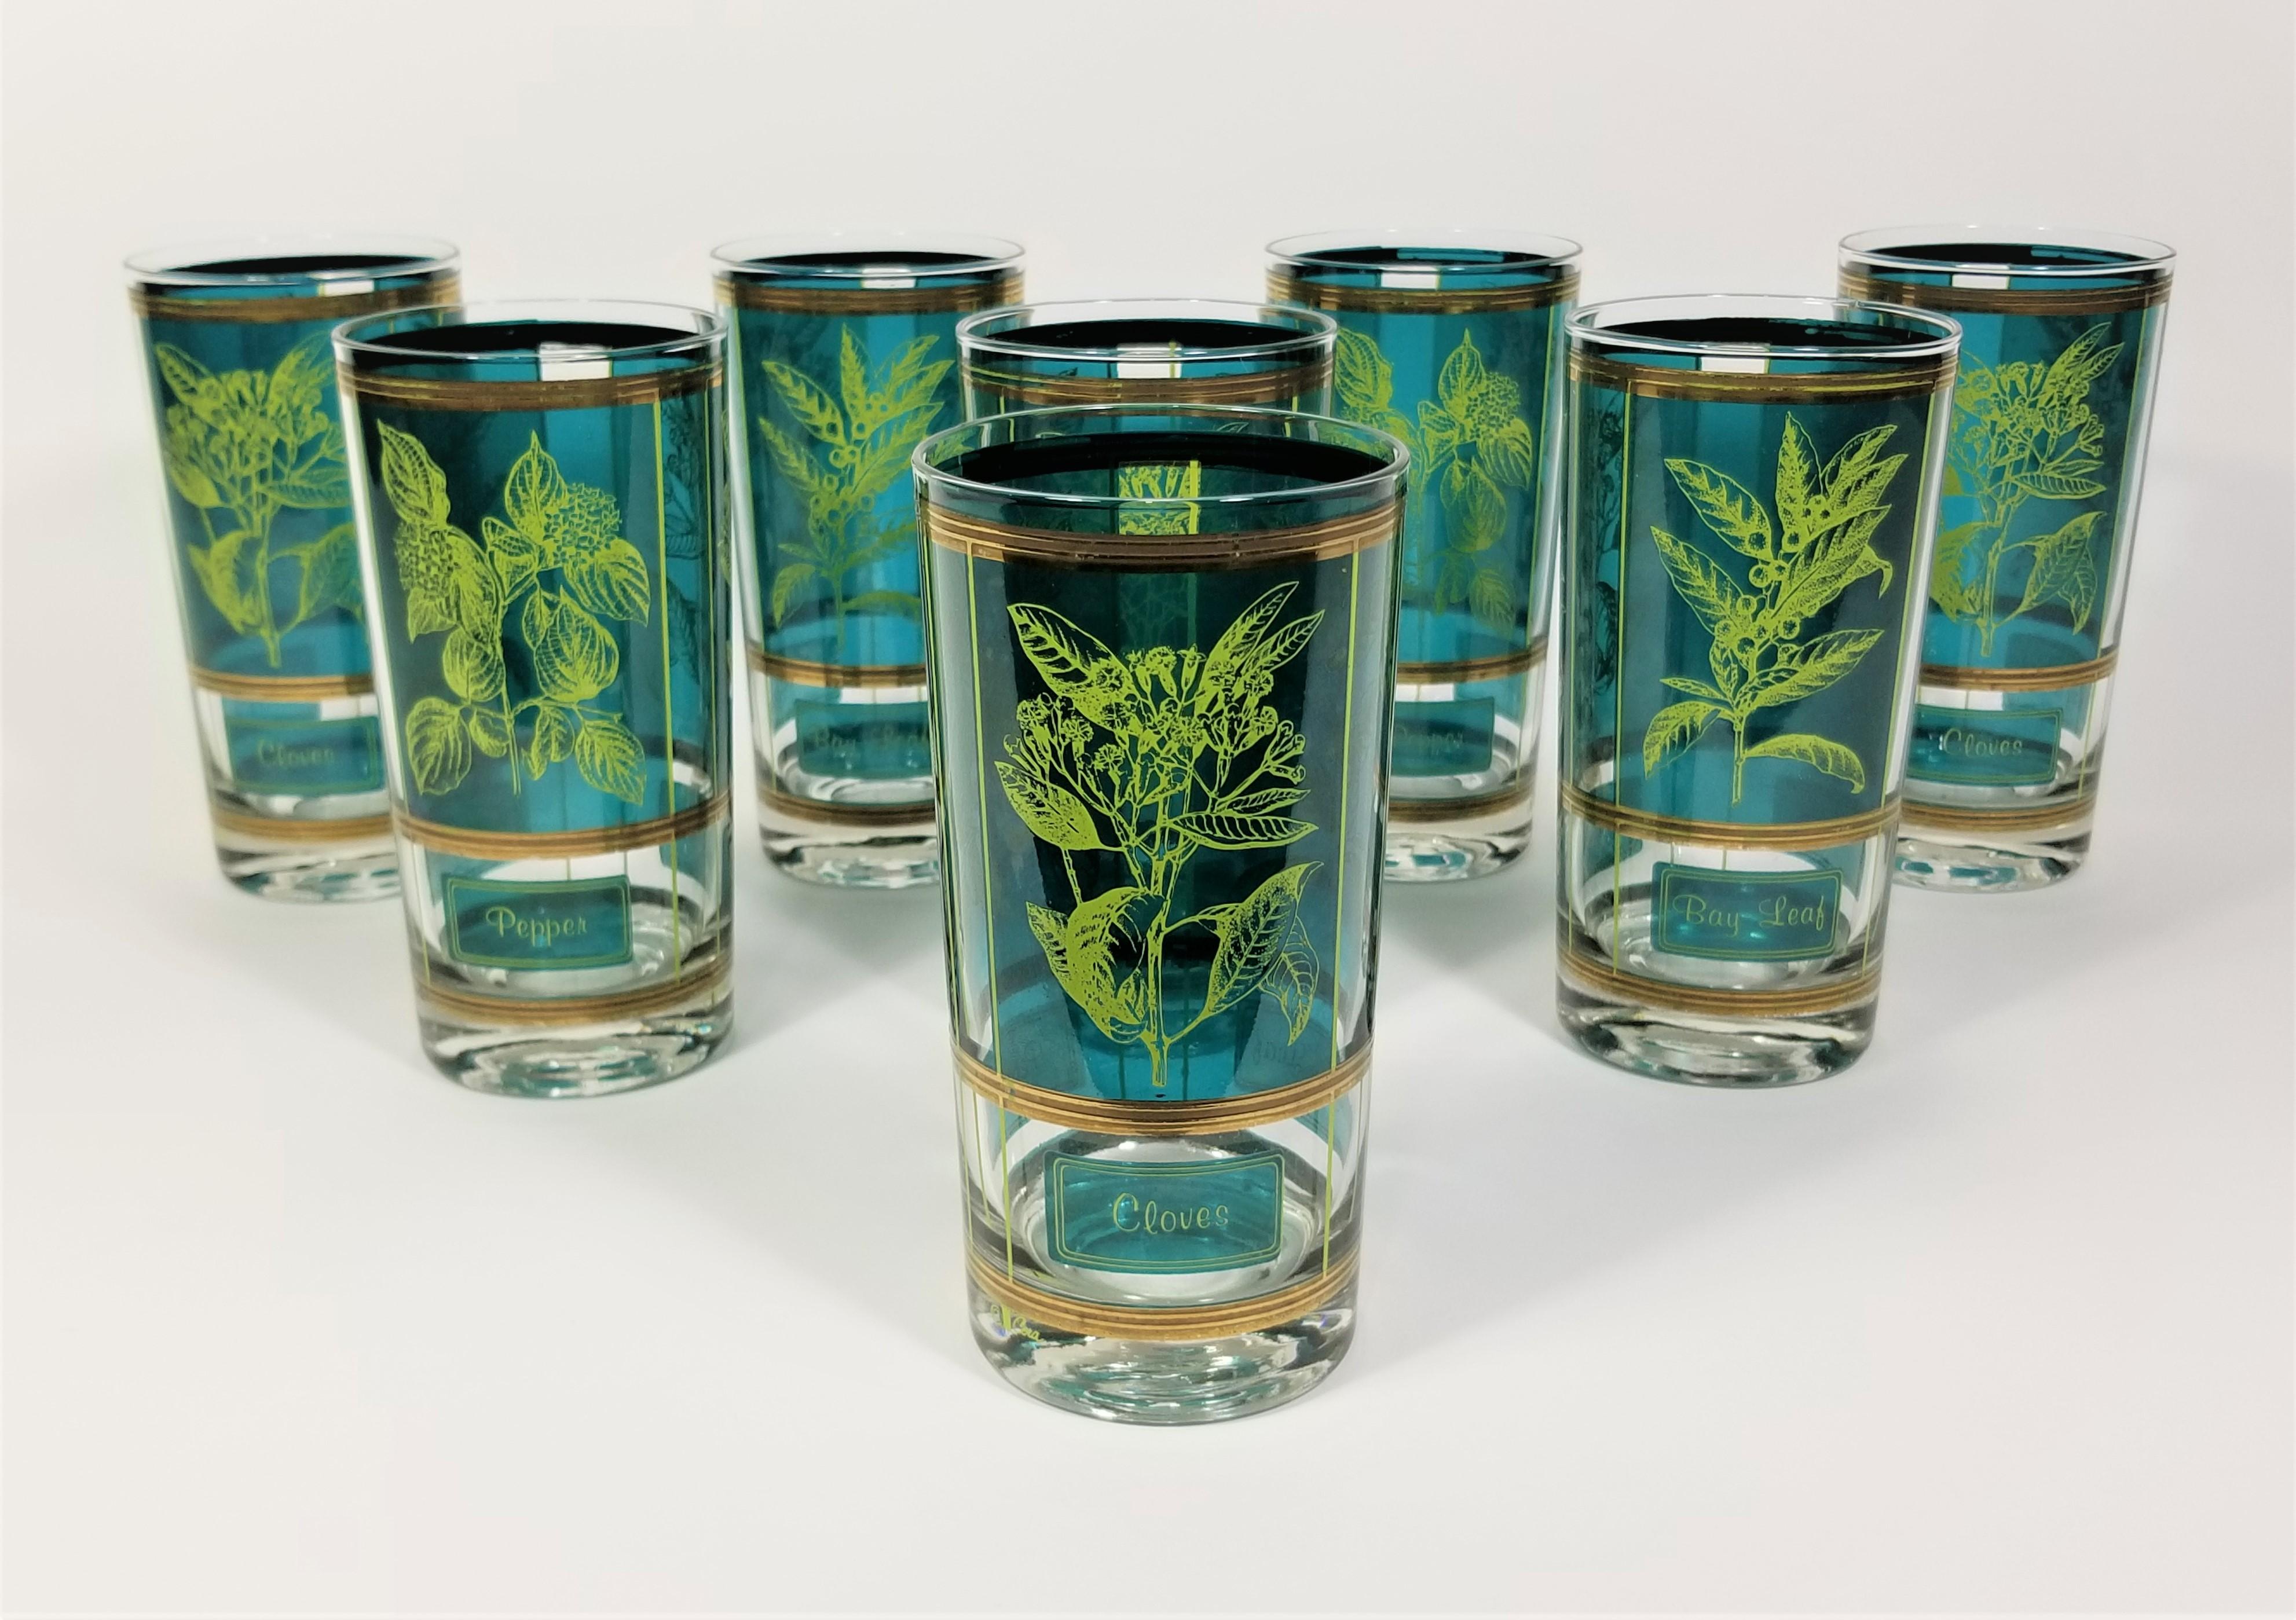 1960s Mid-century cera glassware barware. Herb Motif. 22K Gold. Set of 8. All glasses are signed and in Excellent condition.